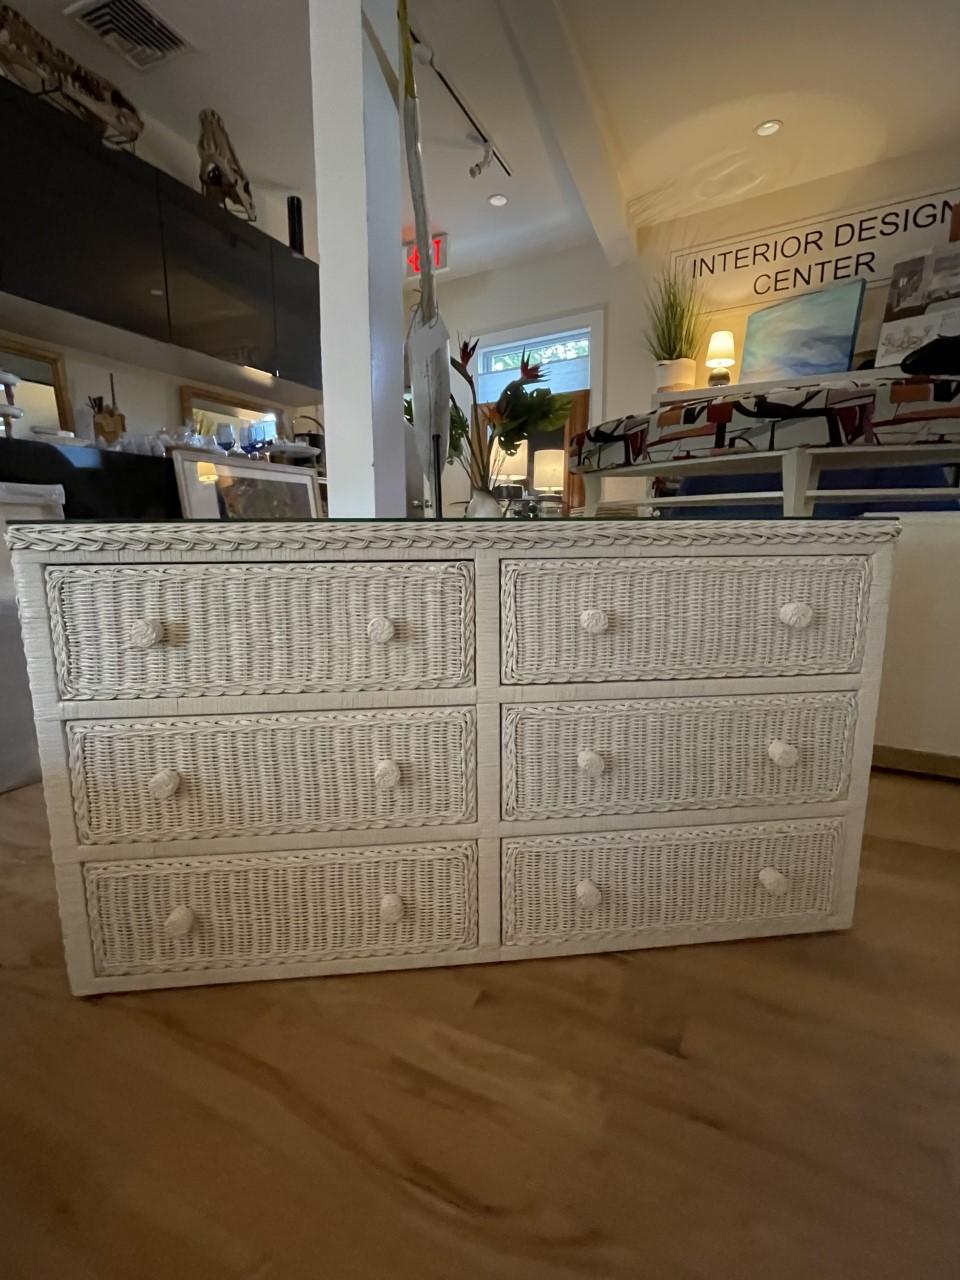 Palm Beach Vintage Wicker Six Drawer Dresser or Chest In Excellent Condition For Sale In Bellport, NY